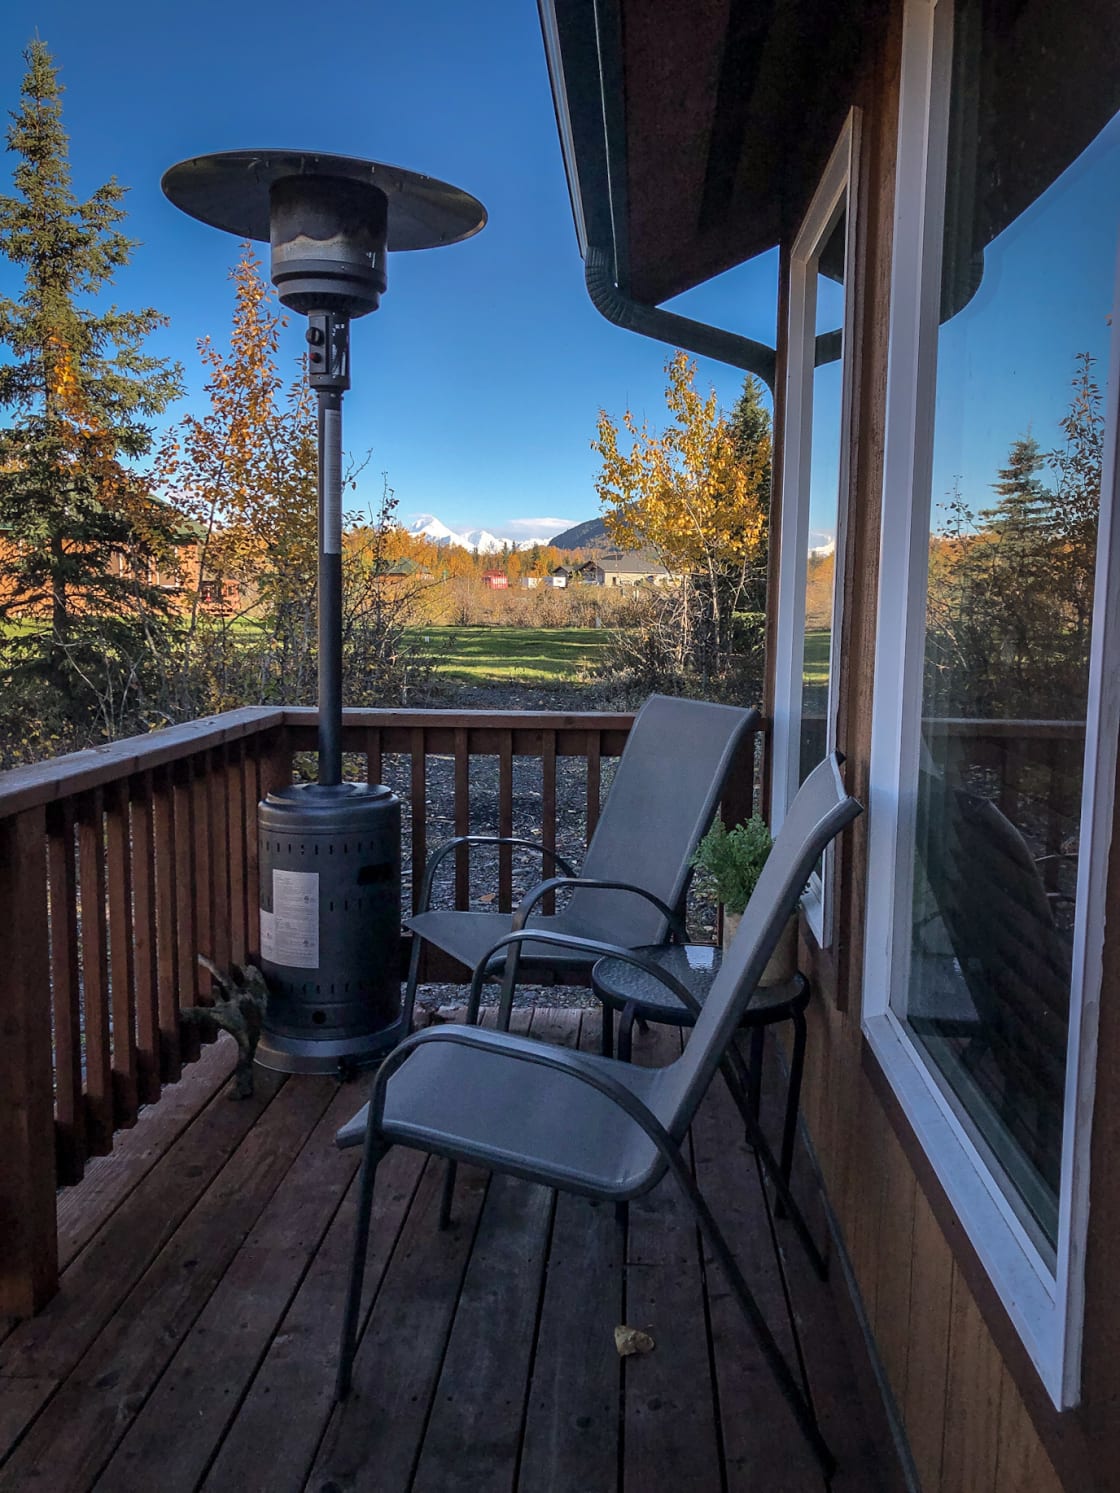 Enjoy sitting on the deck taking in the surrounding mountains while staying warm under the heater. 